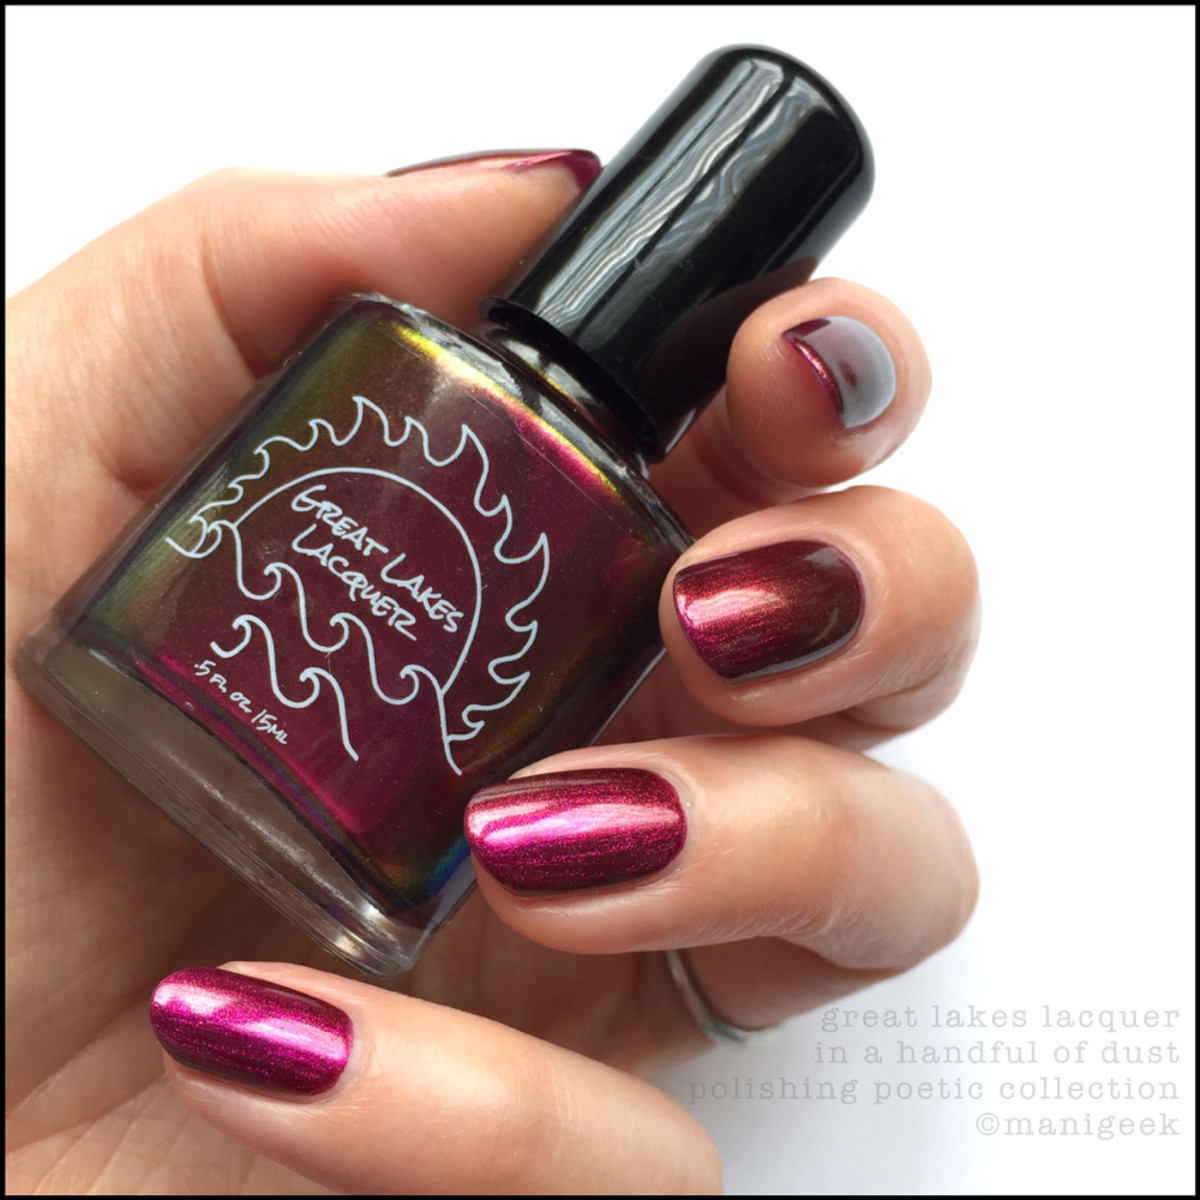 Great Lakes Lacquer In a Handful of Dust_Indie Expo Canada 2017 Swatches